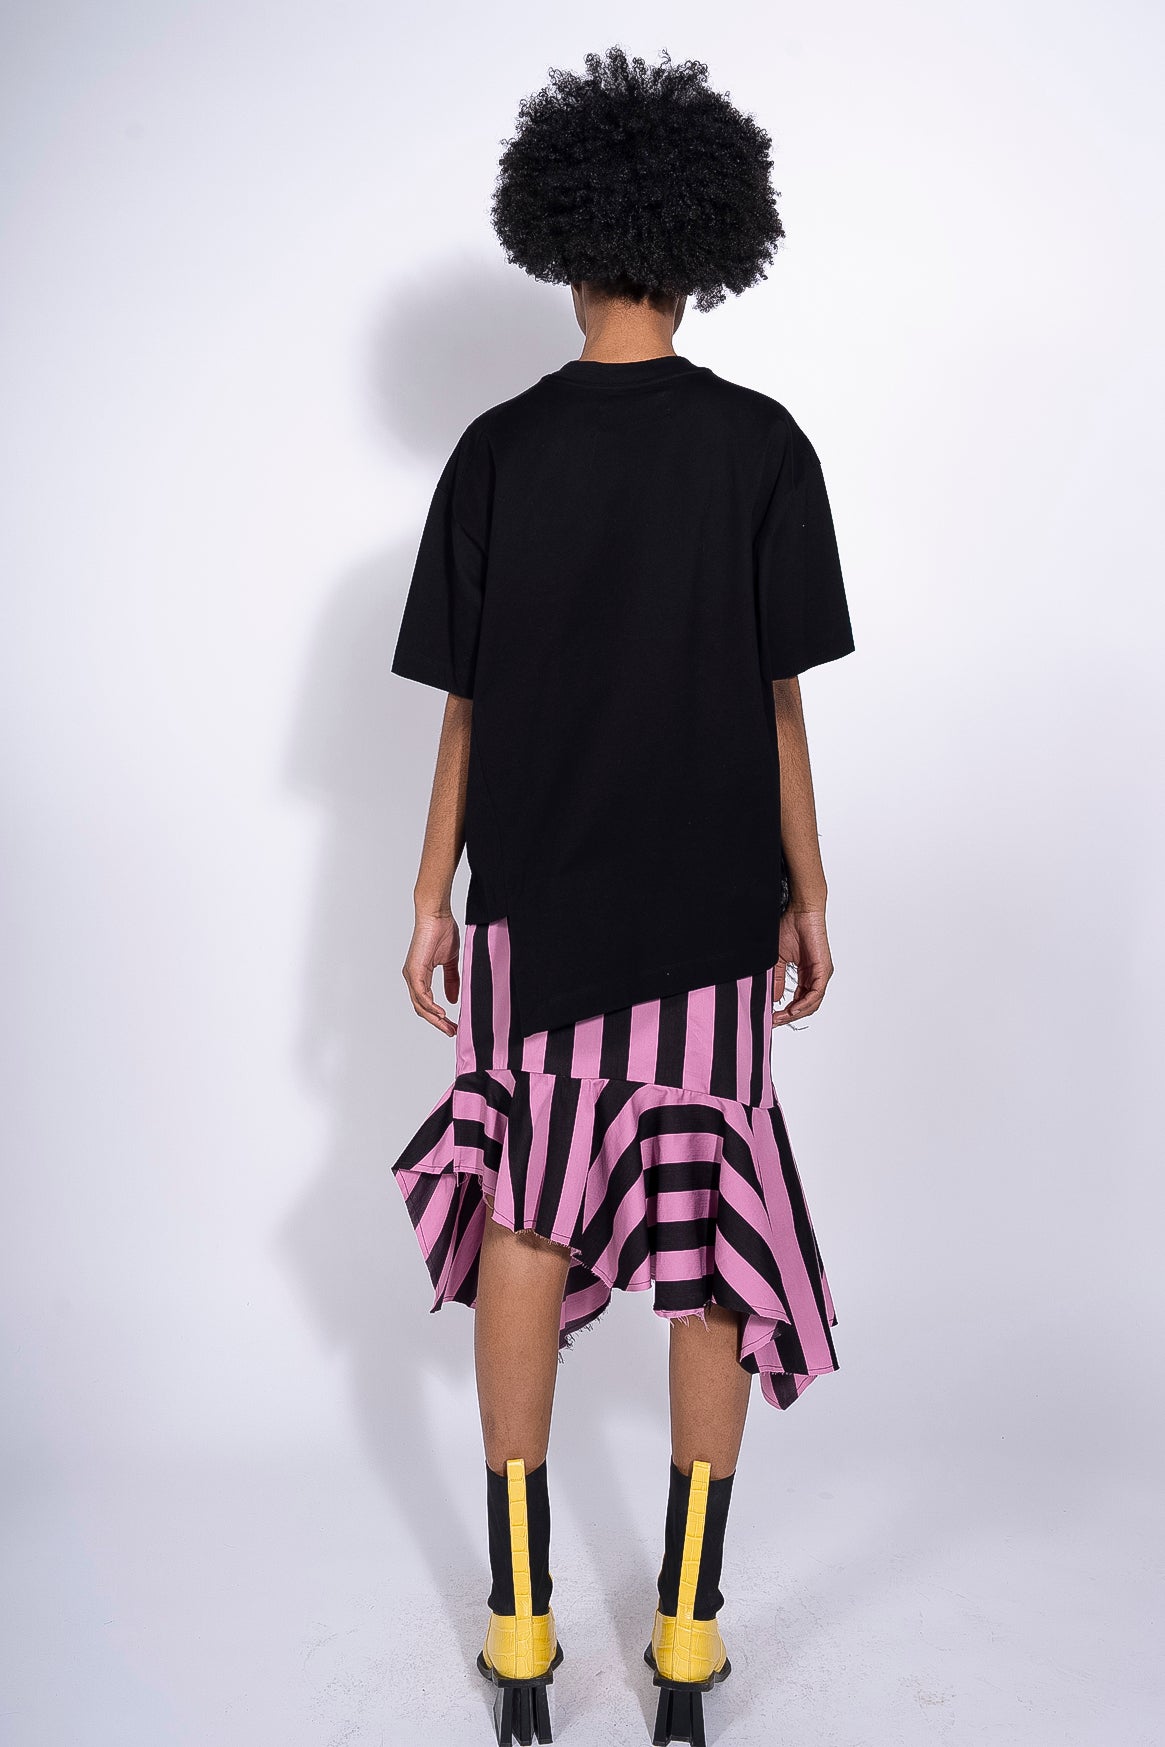 BLACK OVERSIZE T-SHIRT WITH SIDE FEATHERS marques almeida